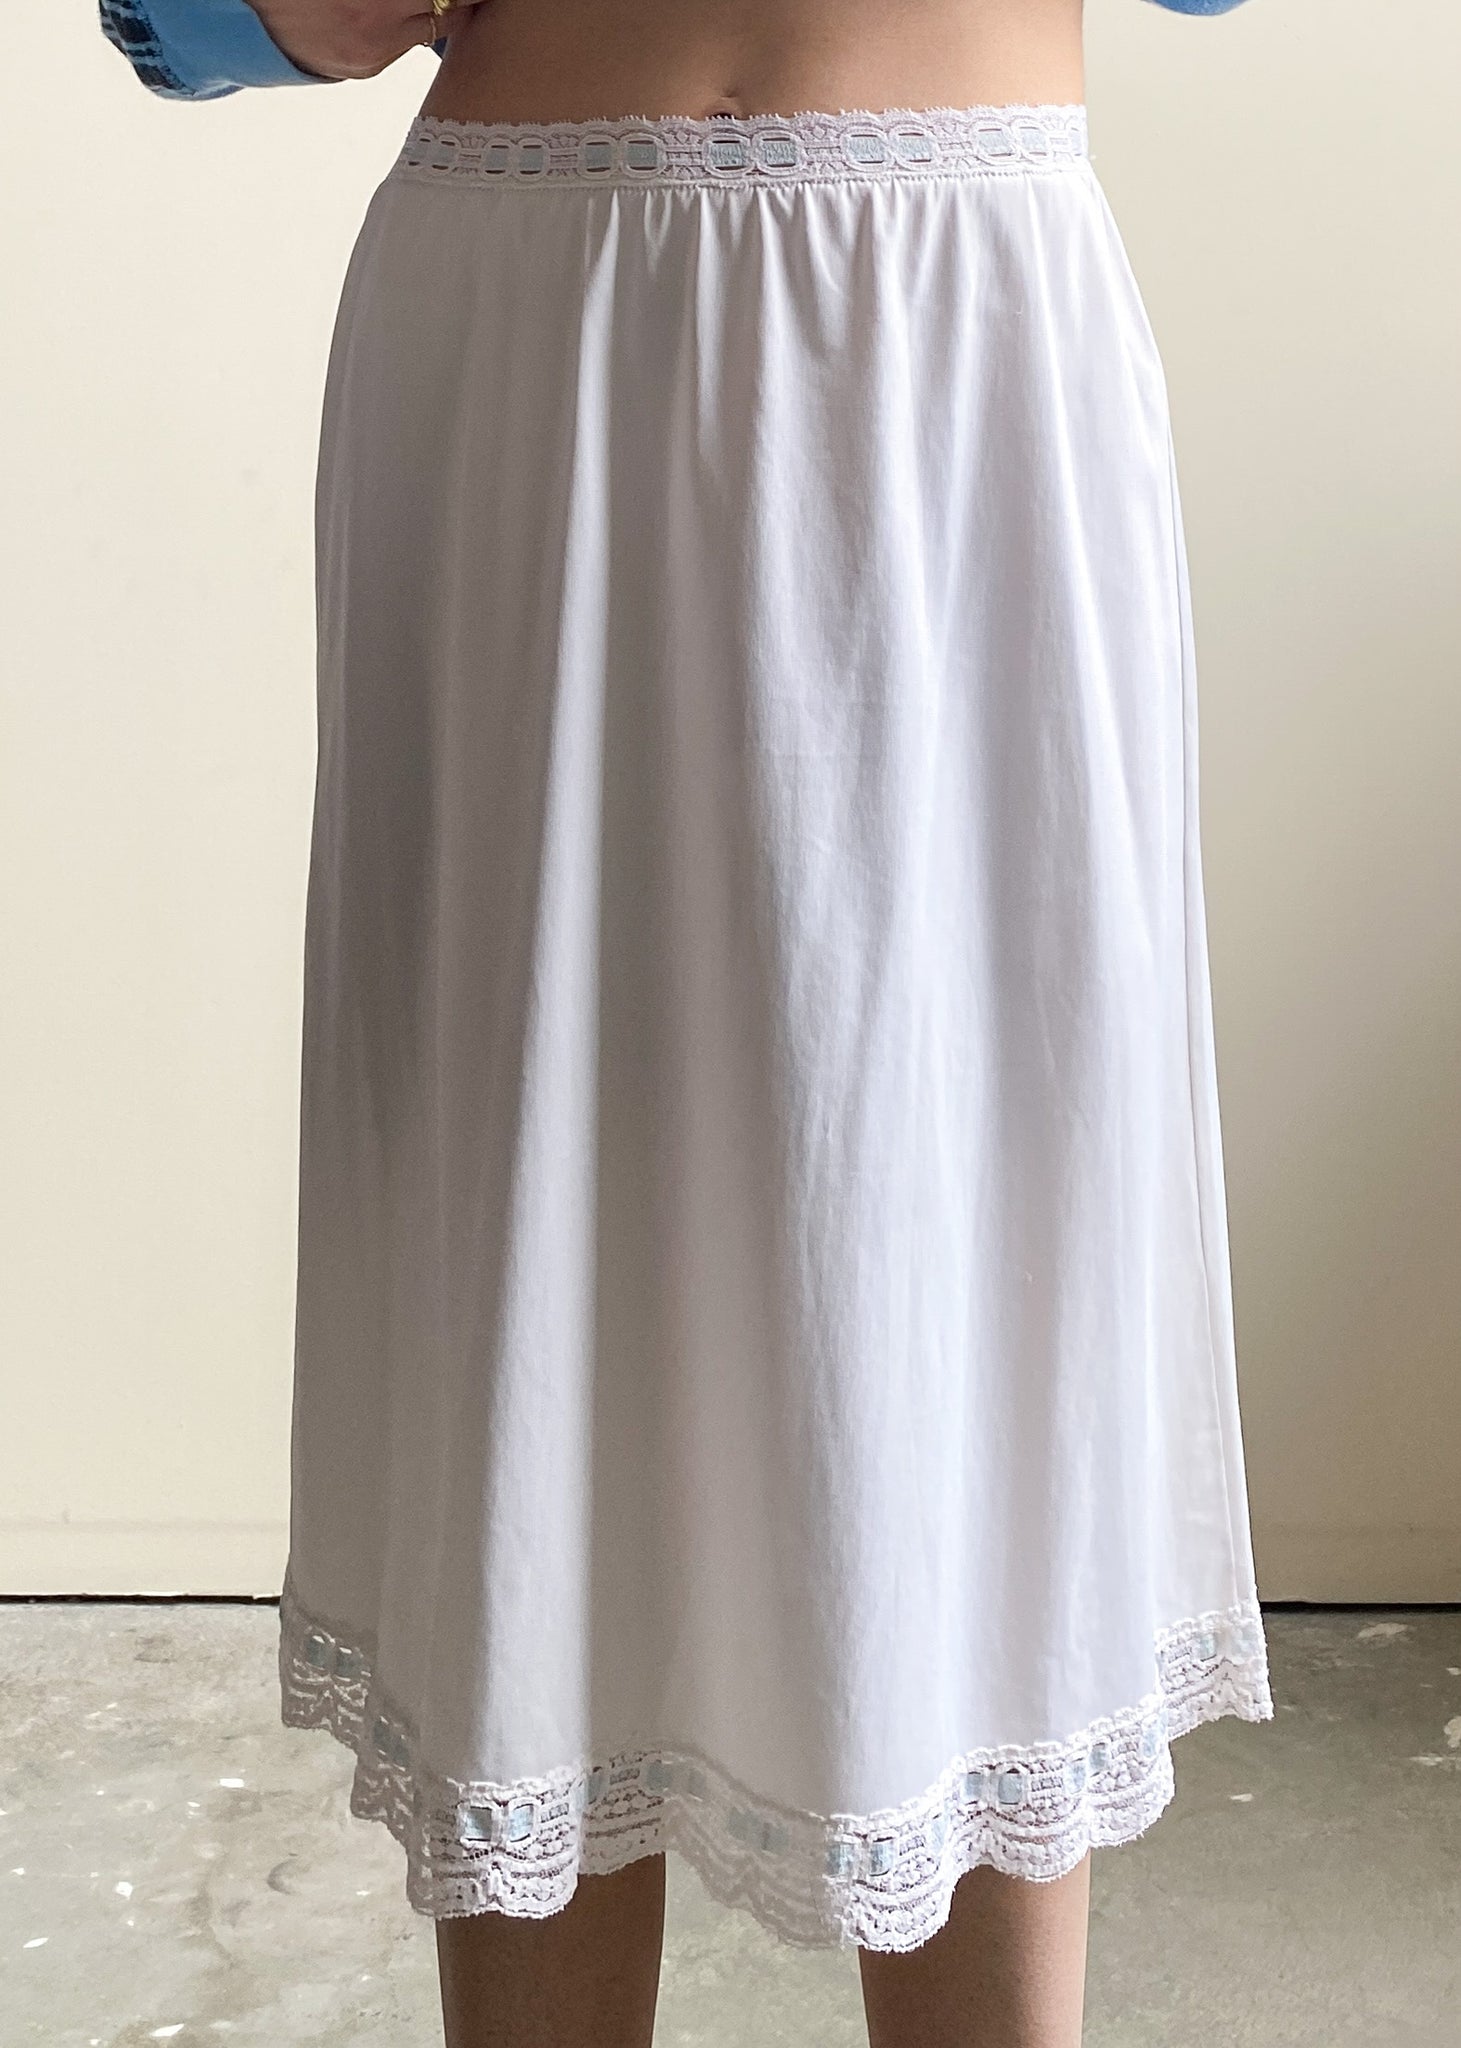 White Slip Skirt with Blue Lace Detail (XS/S)